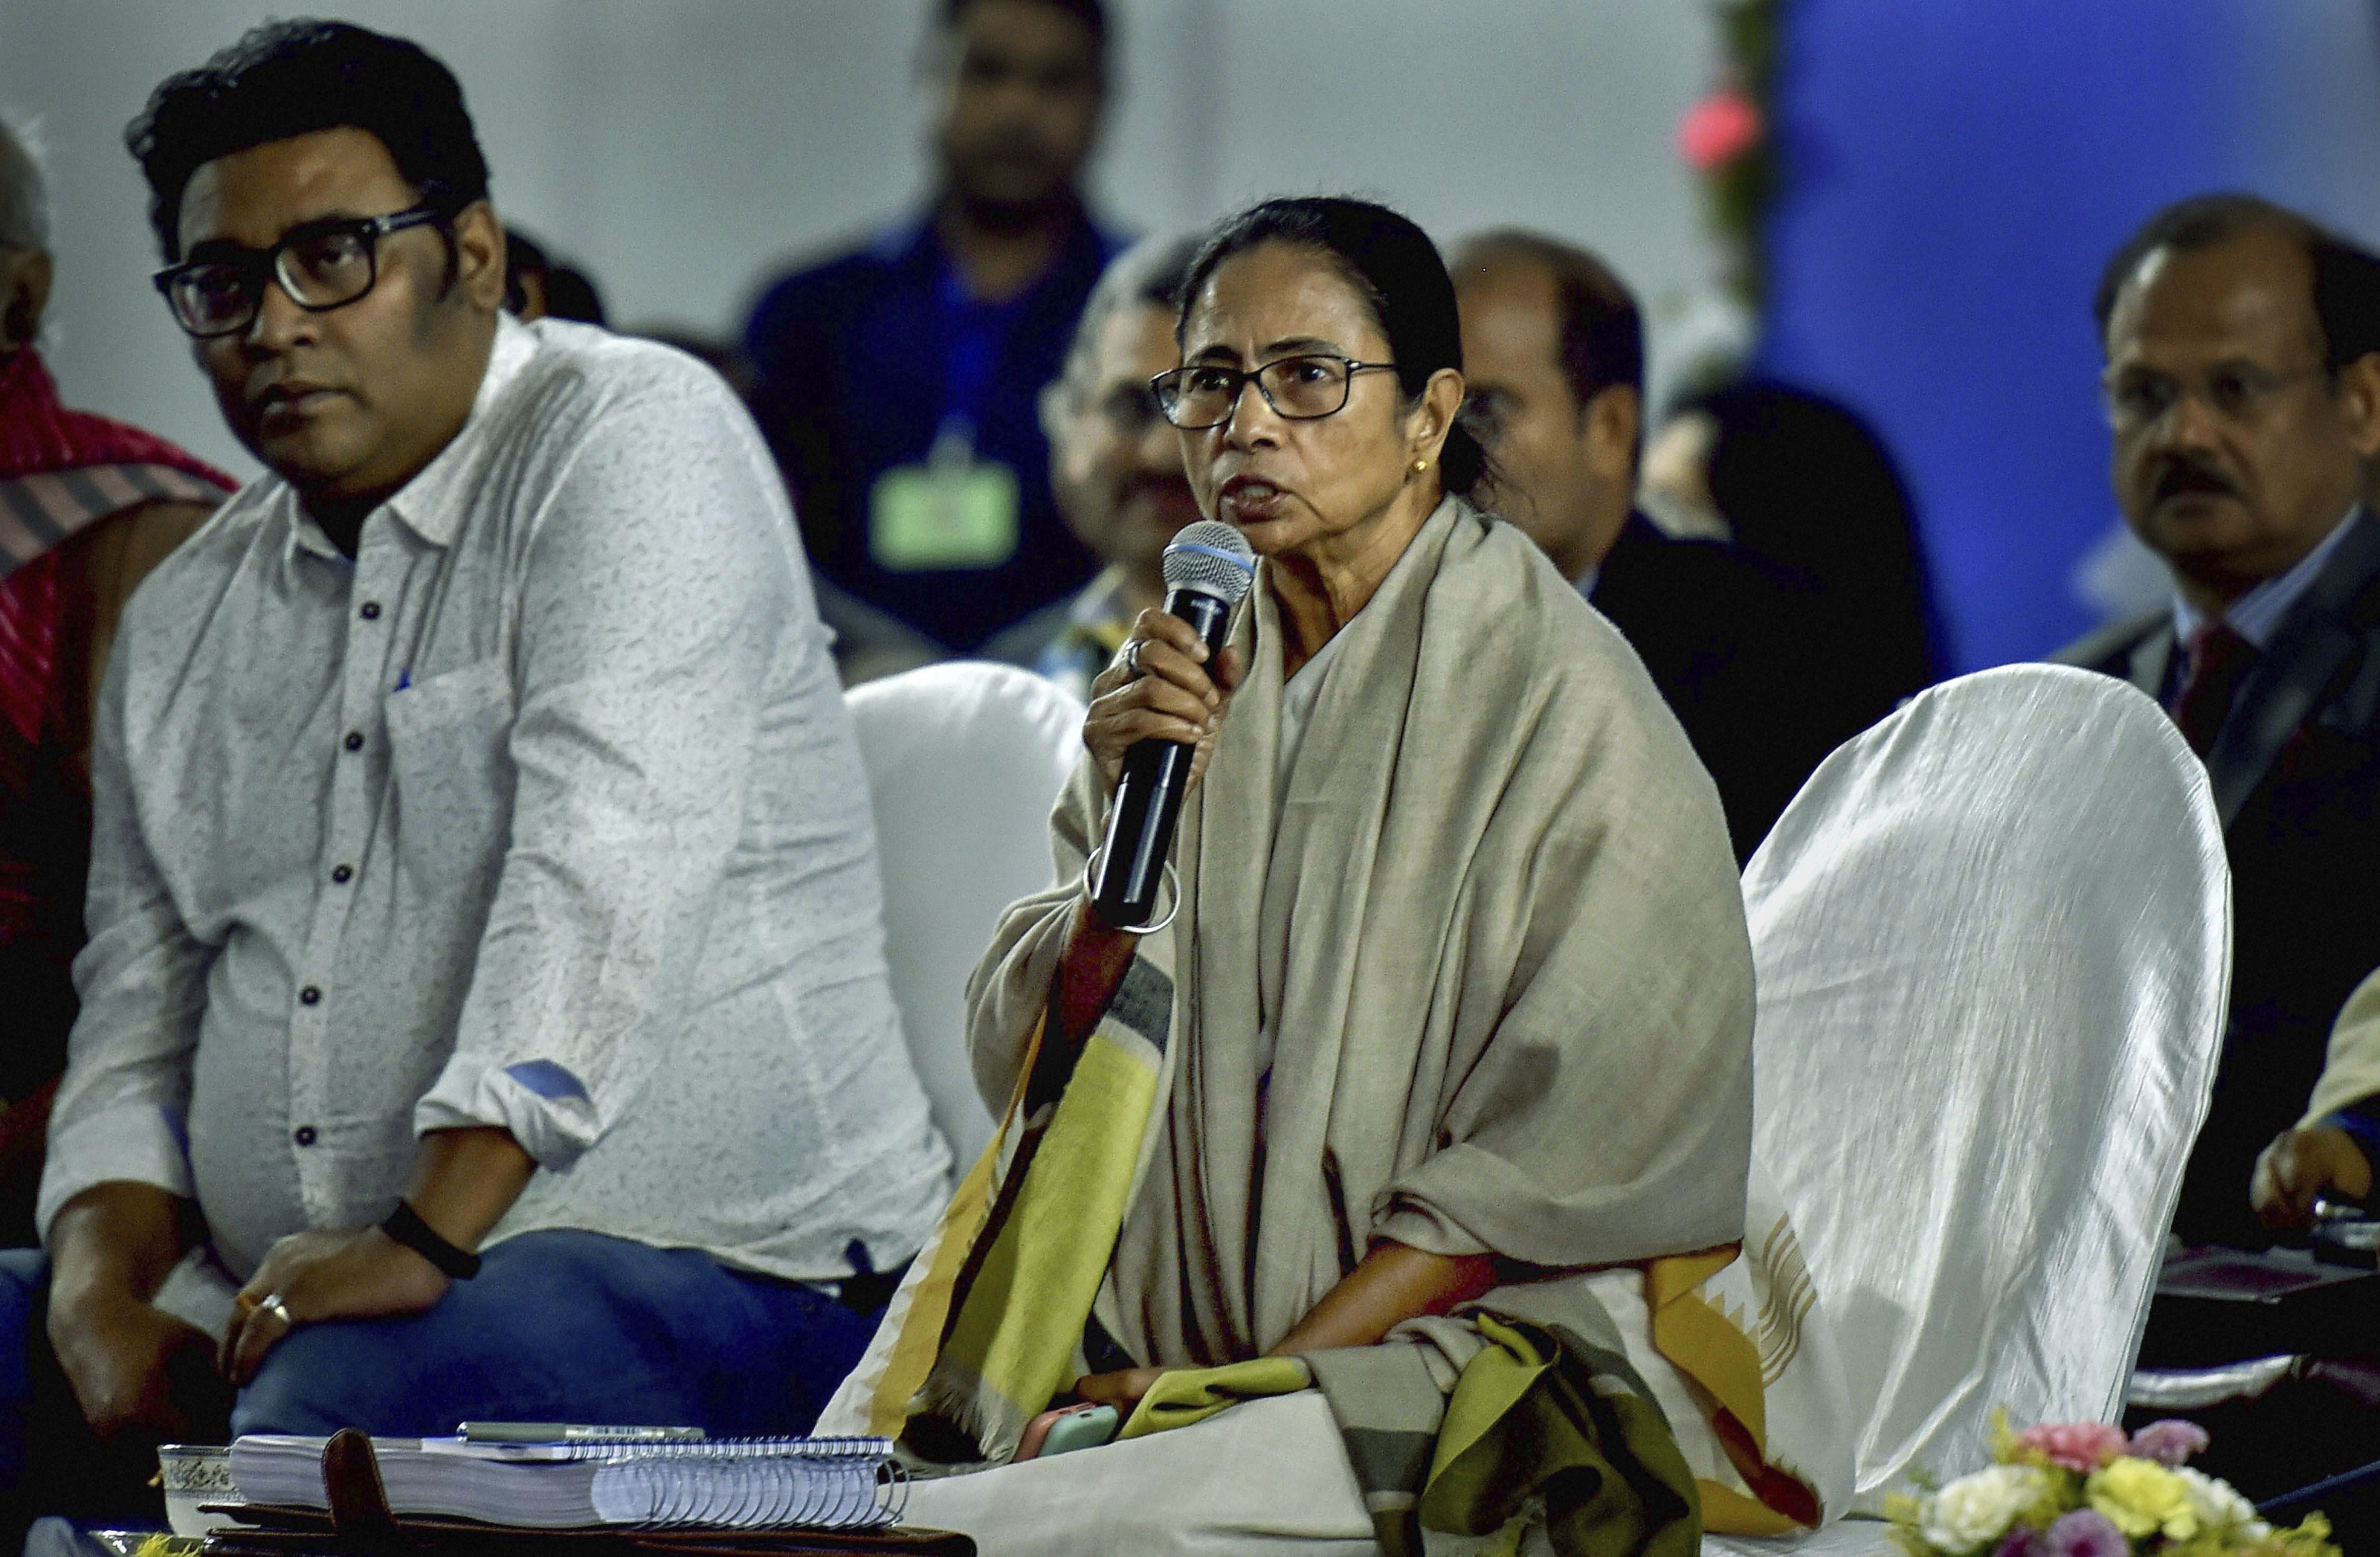 West Bengal Chief Minister Mamata Banerjee speaks during an adminstrative review meeting at Namkhana in South 24 Parganas district of West Bengal - PTI